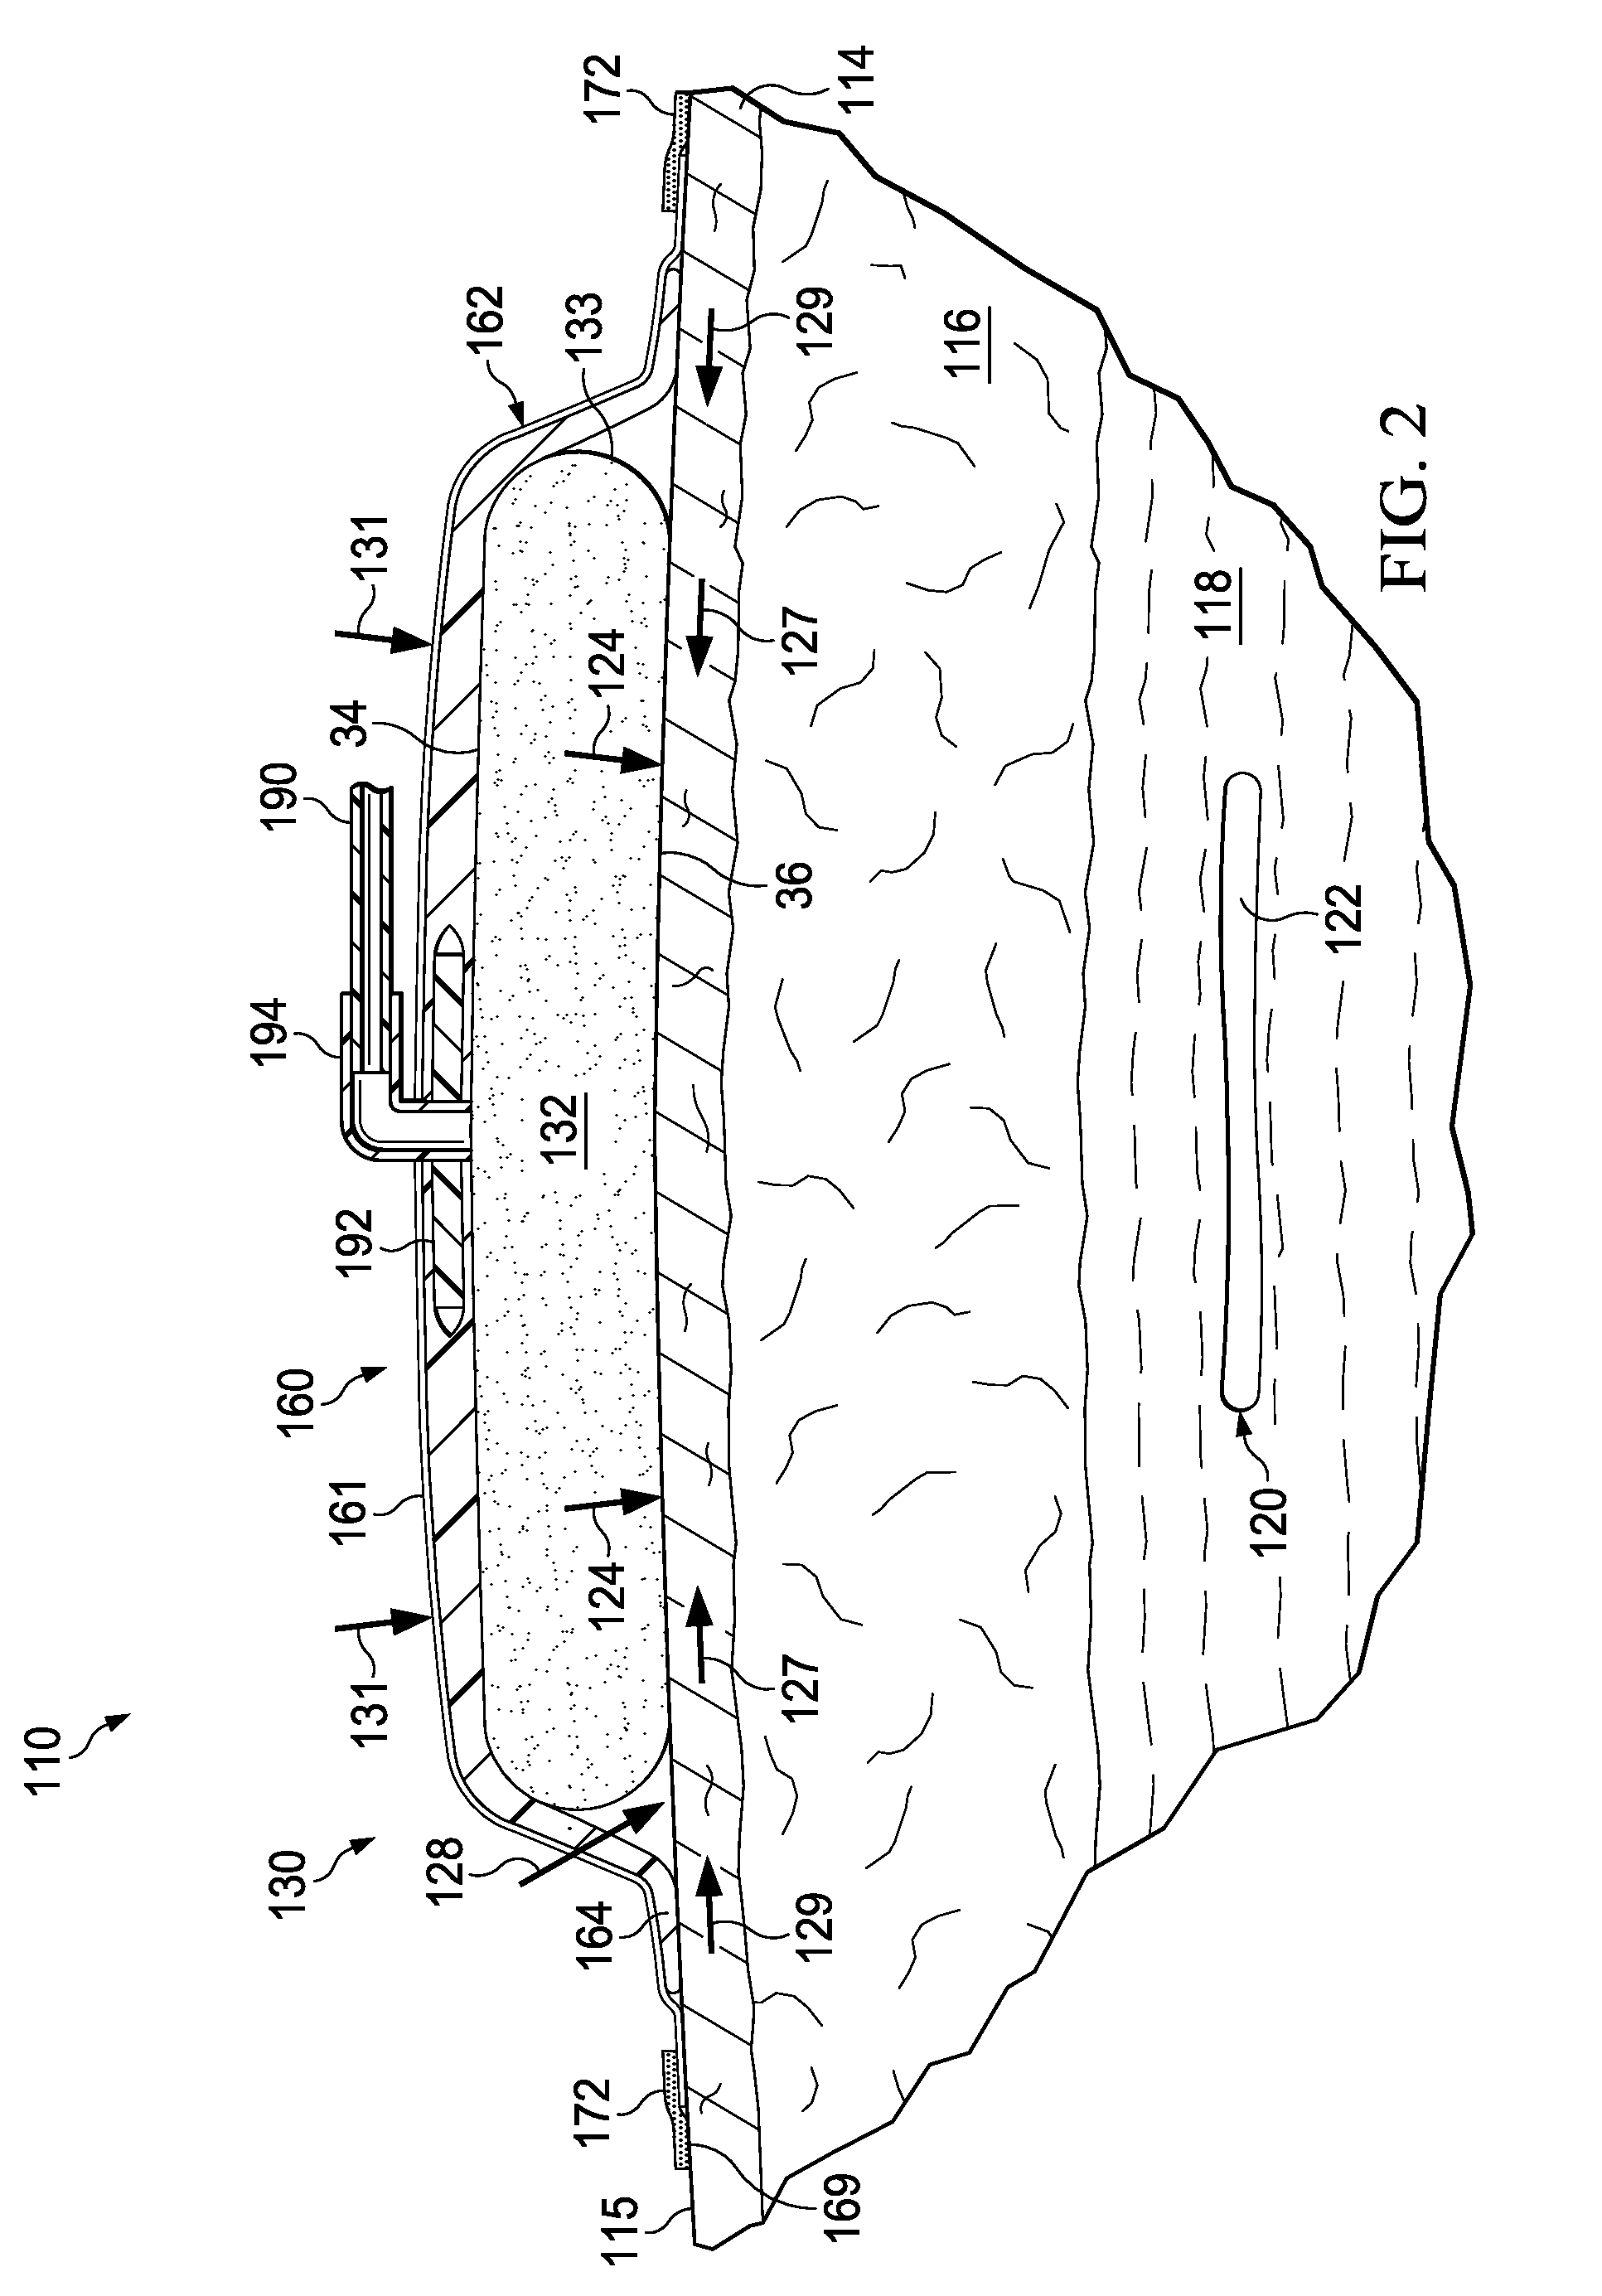 Reduced-pressure surgical wound treatment systems and methods